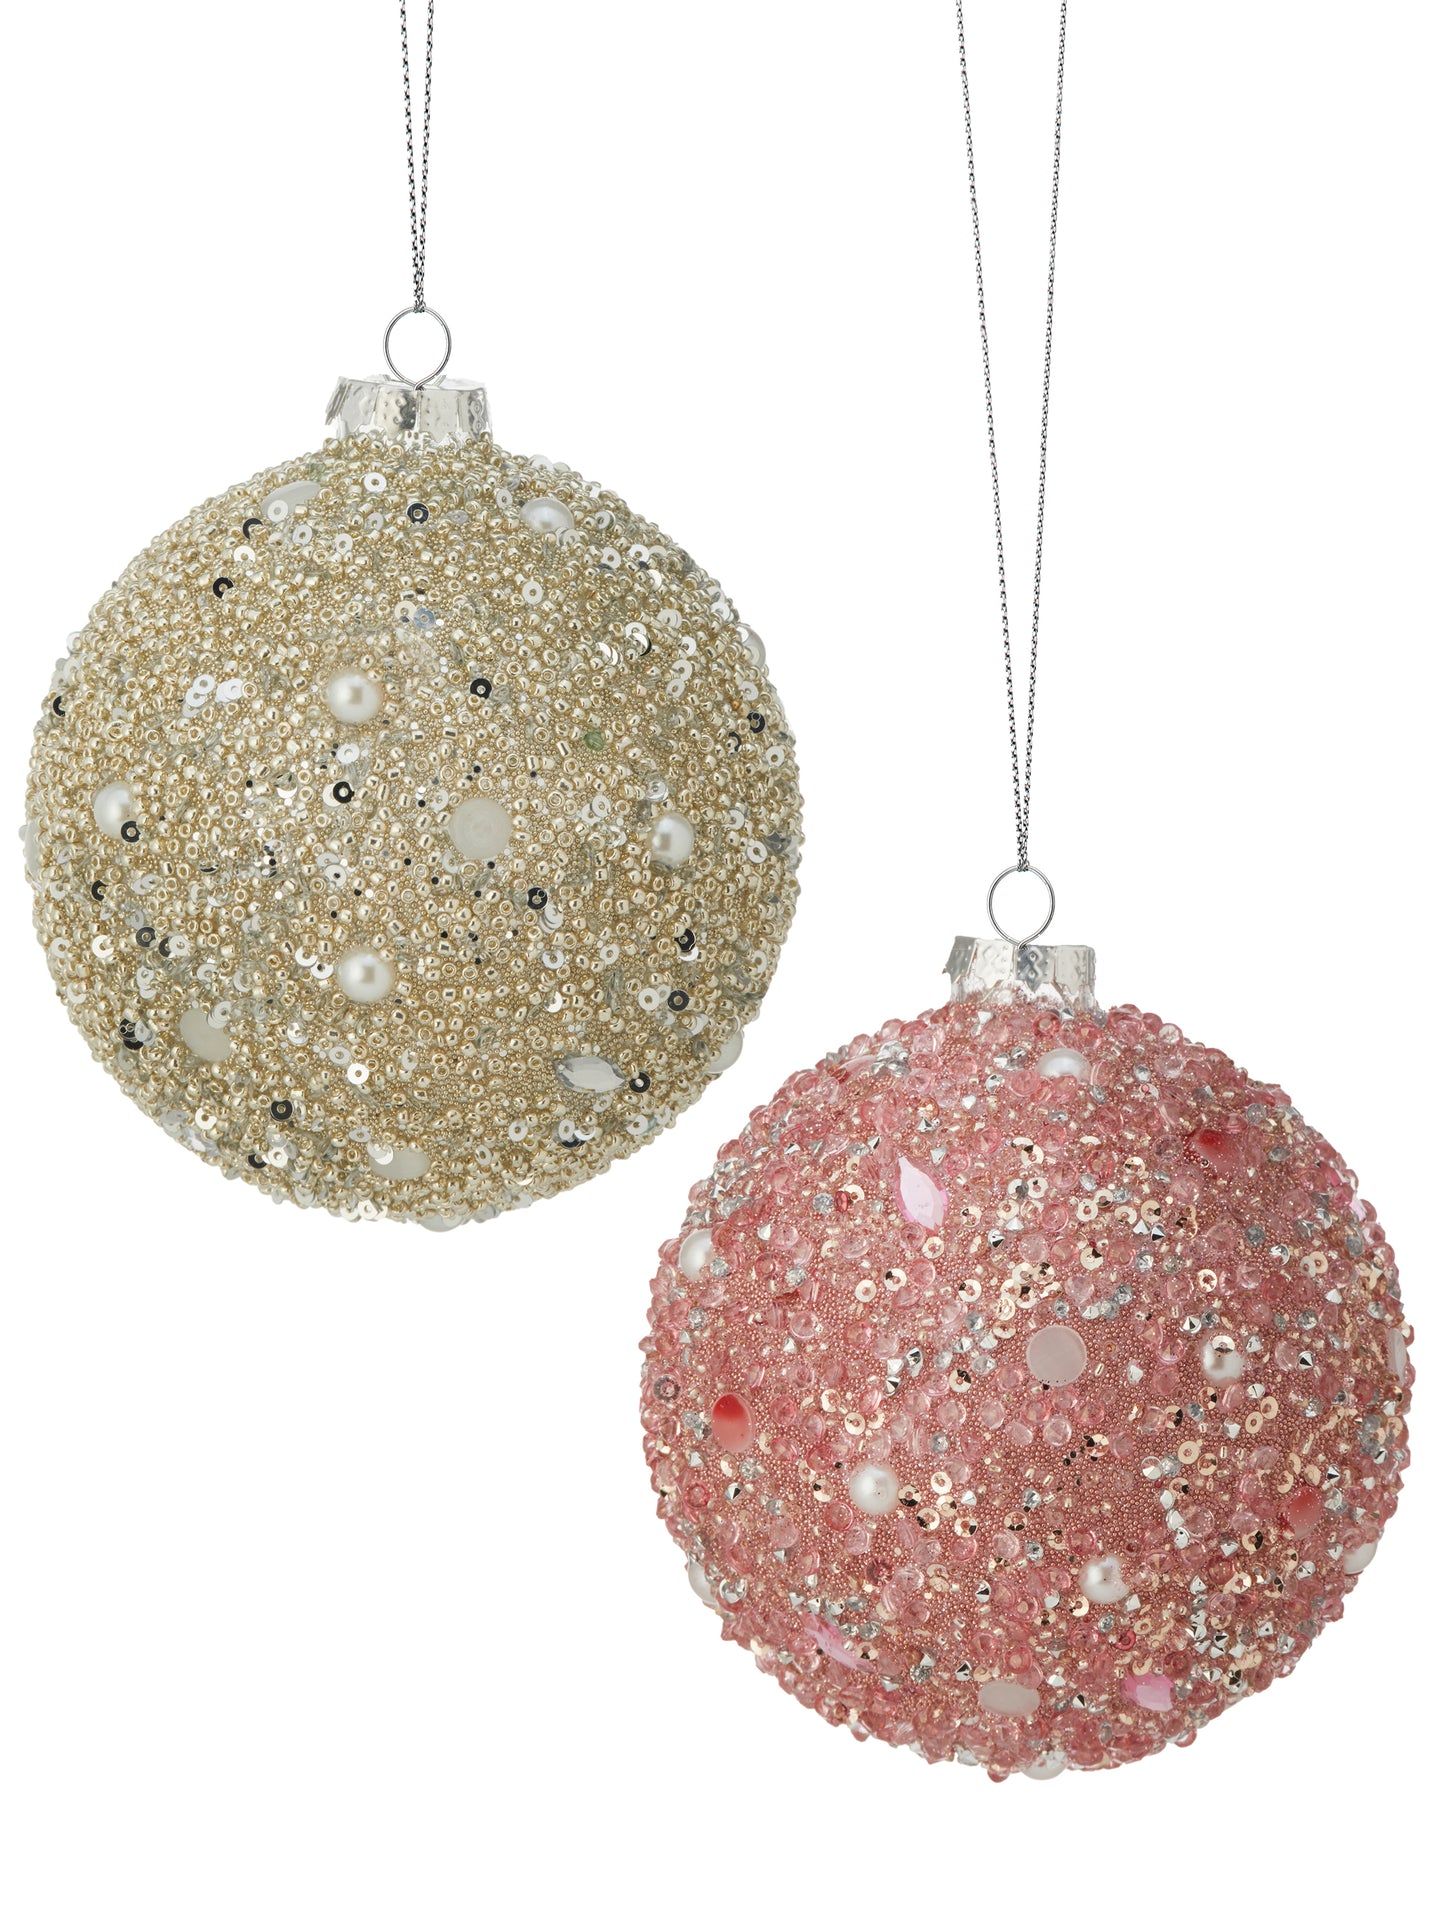 4" Glass Pearl/Jewel Ball Ornament: Champagne or Pink